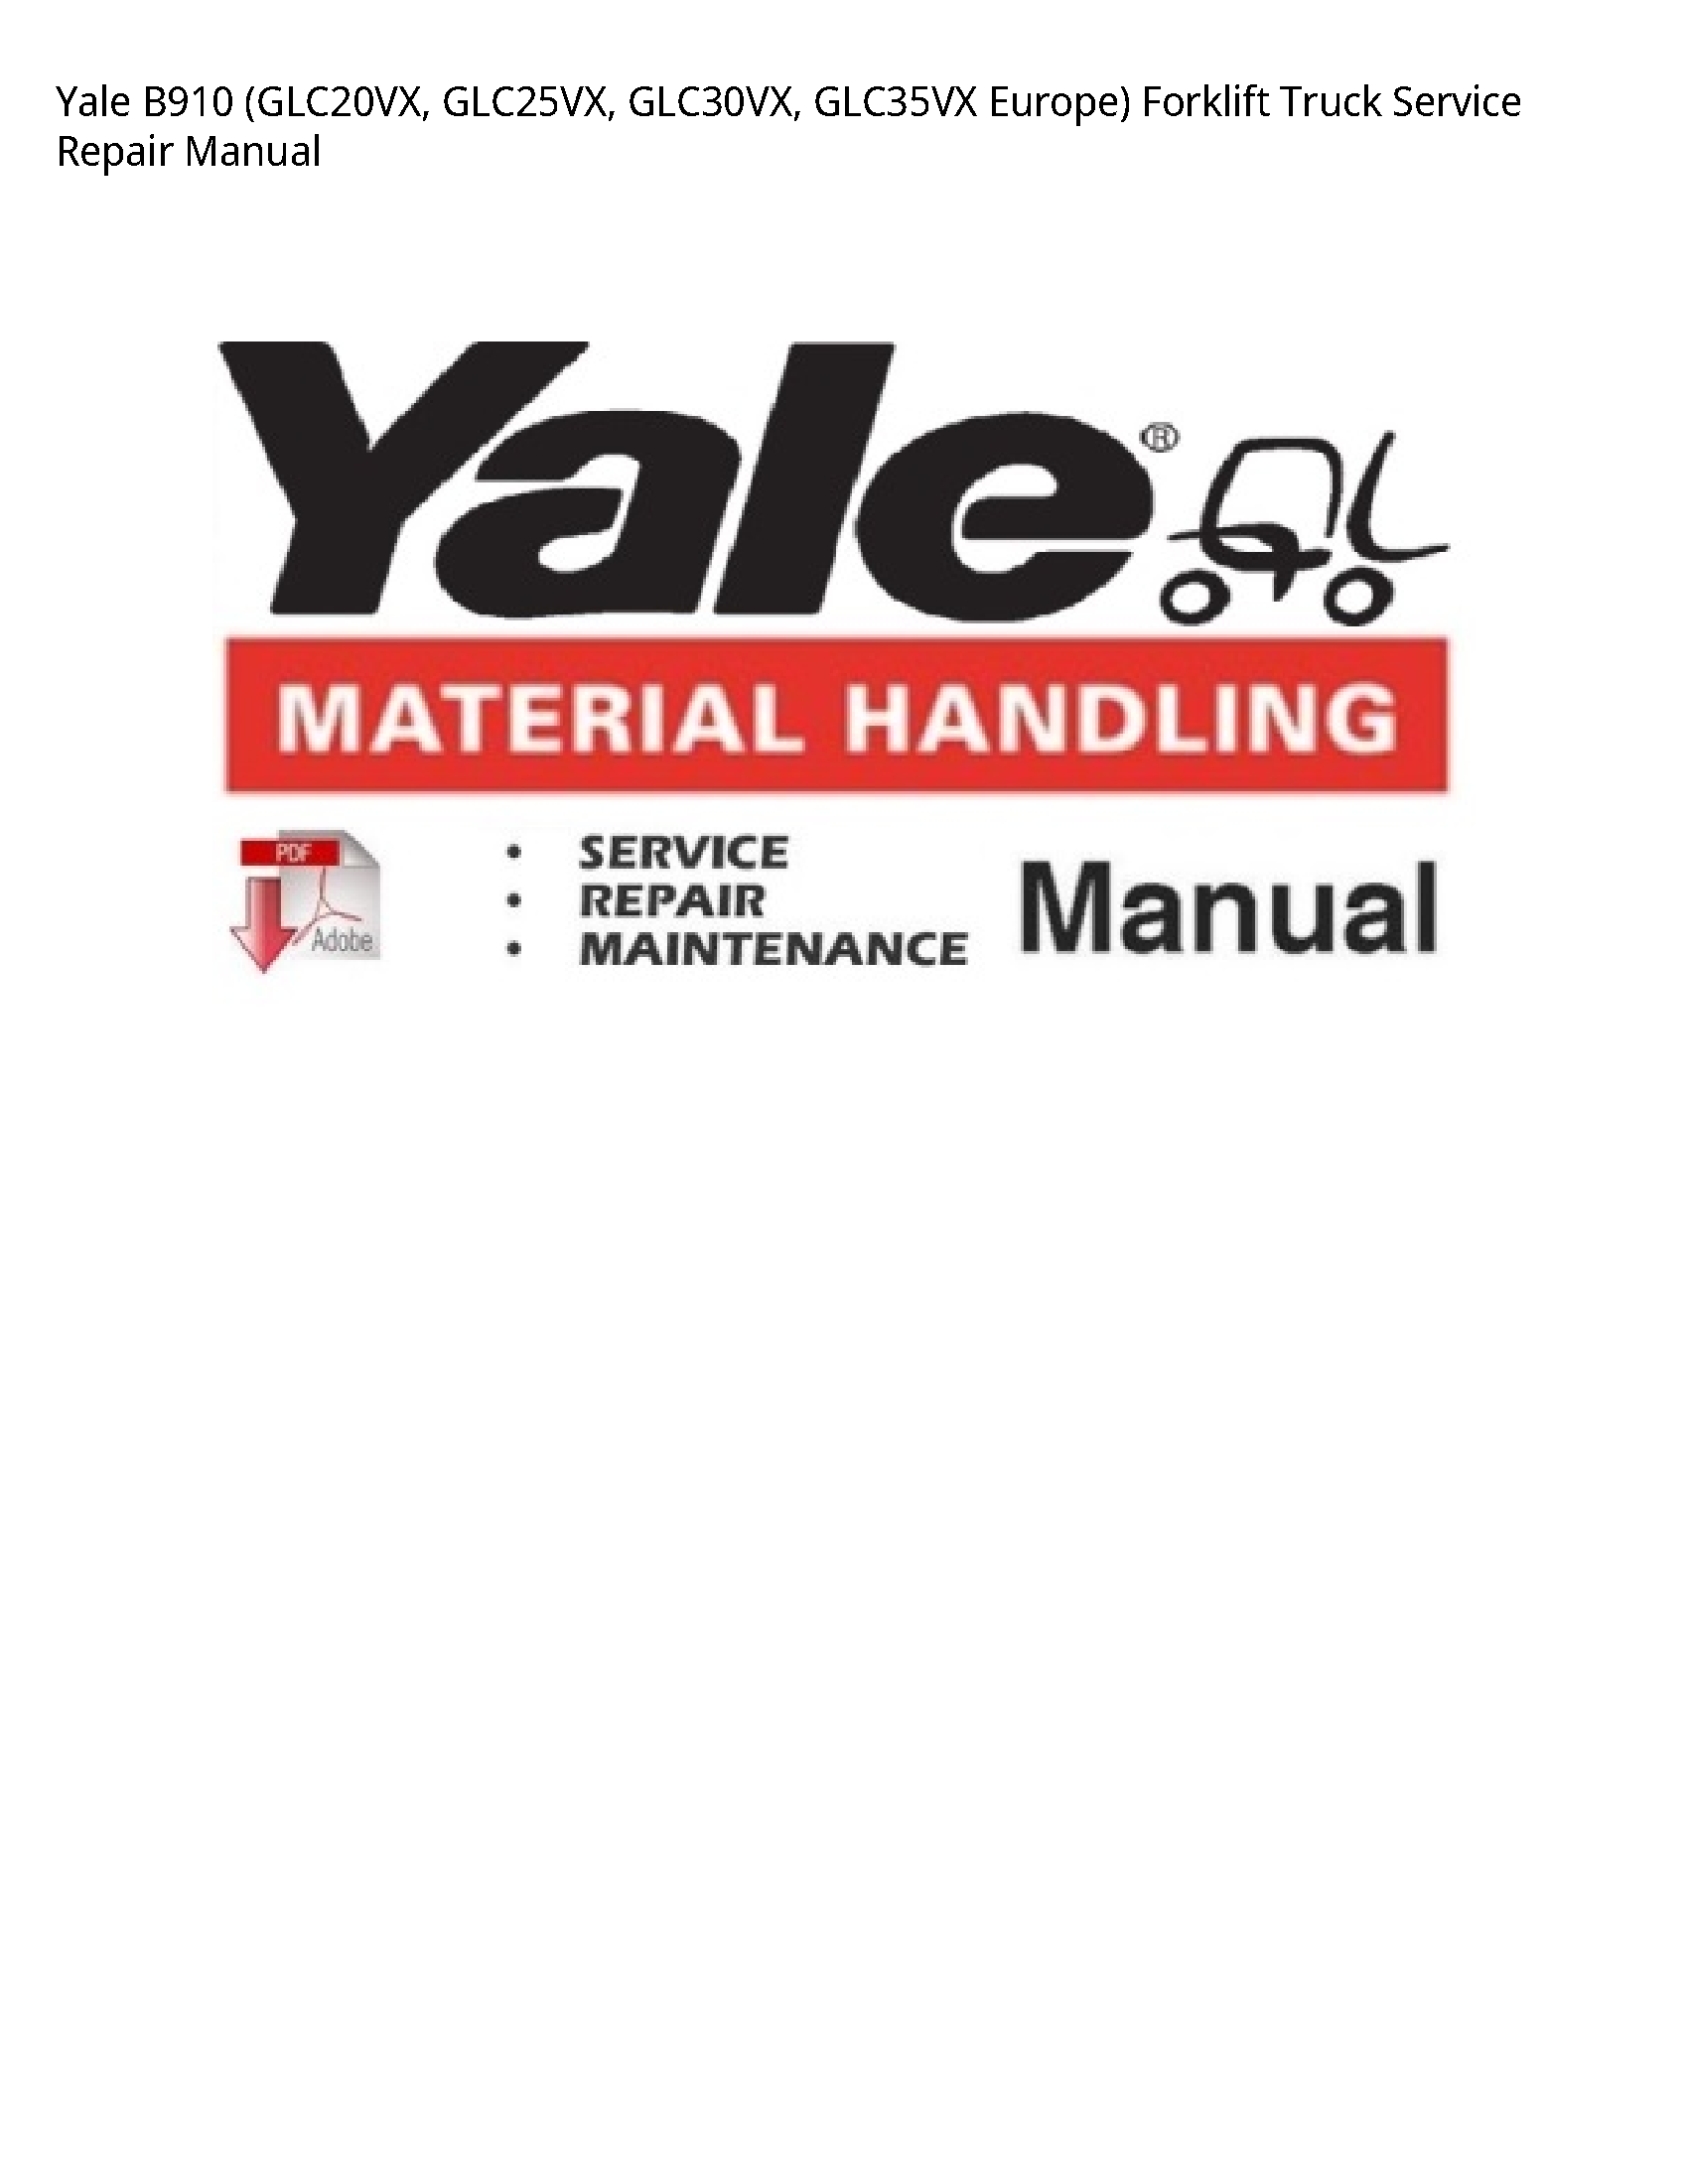 Yale B910 Europe) Forklift Truck manual